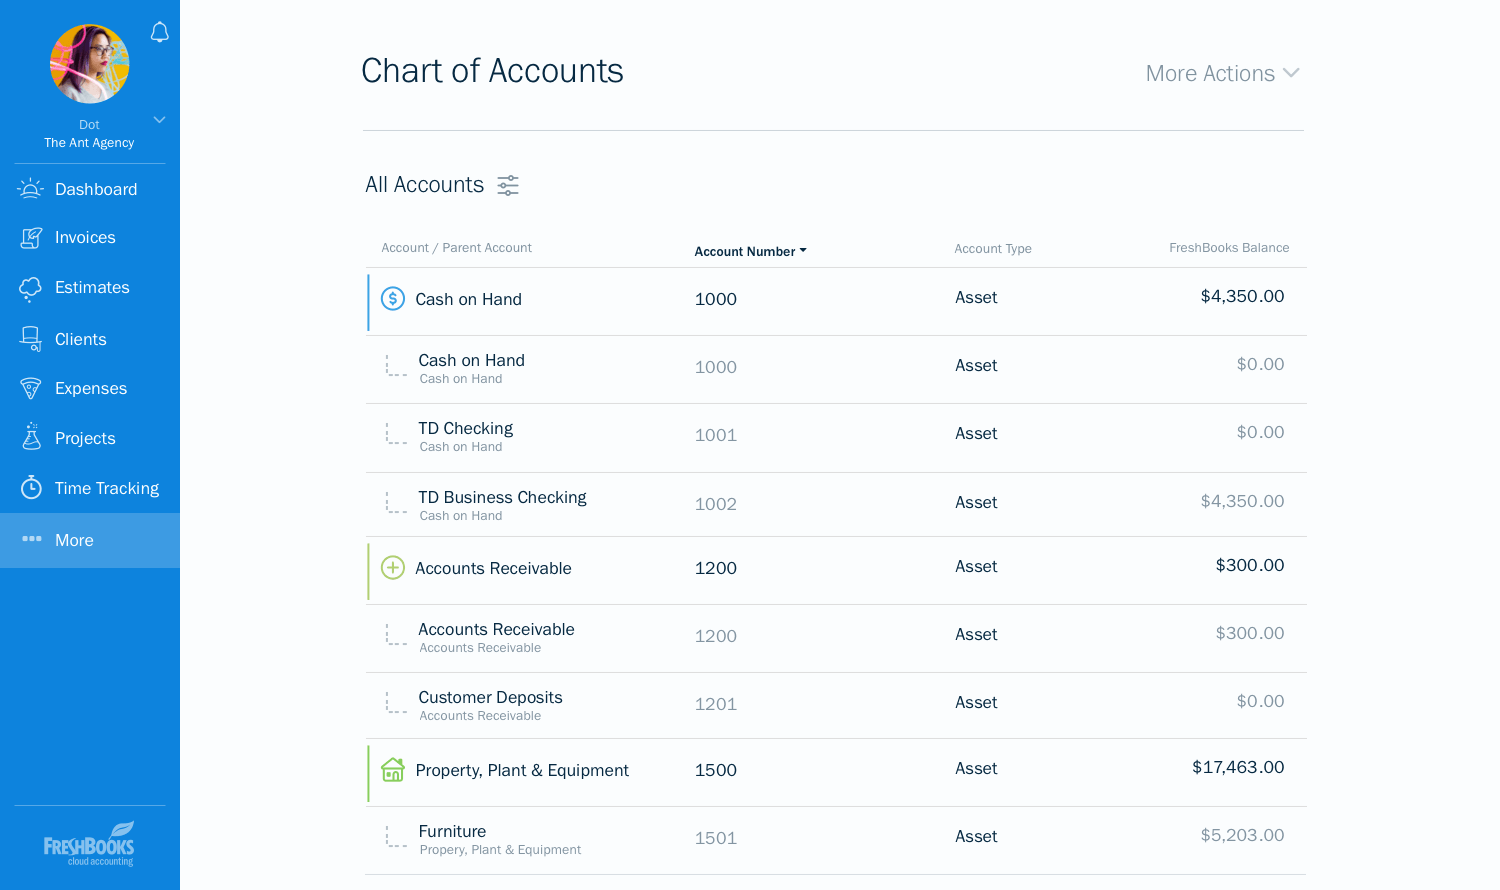 See all important assets, liabilities, and more in one look 